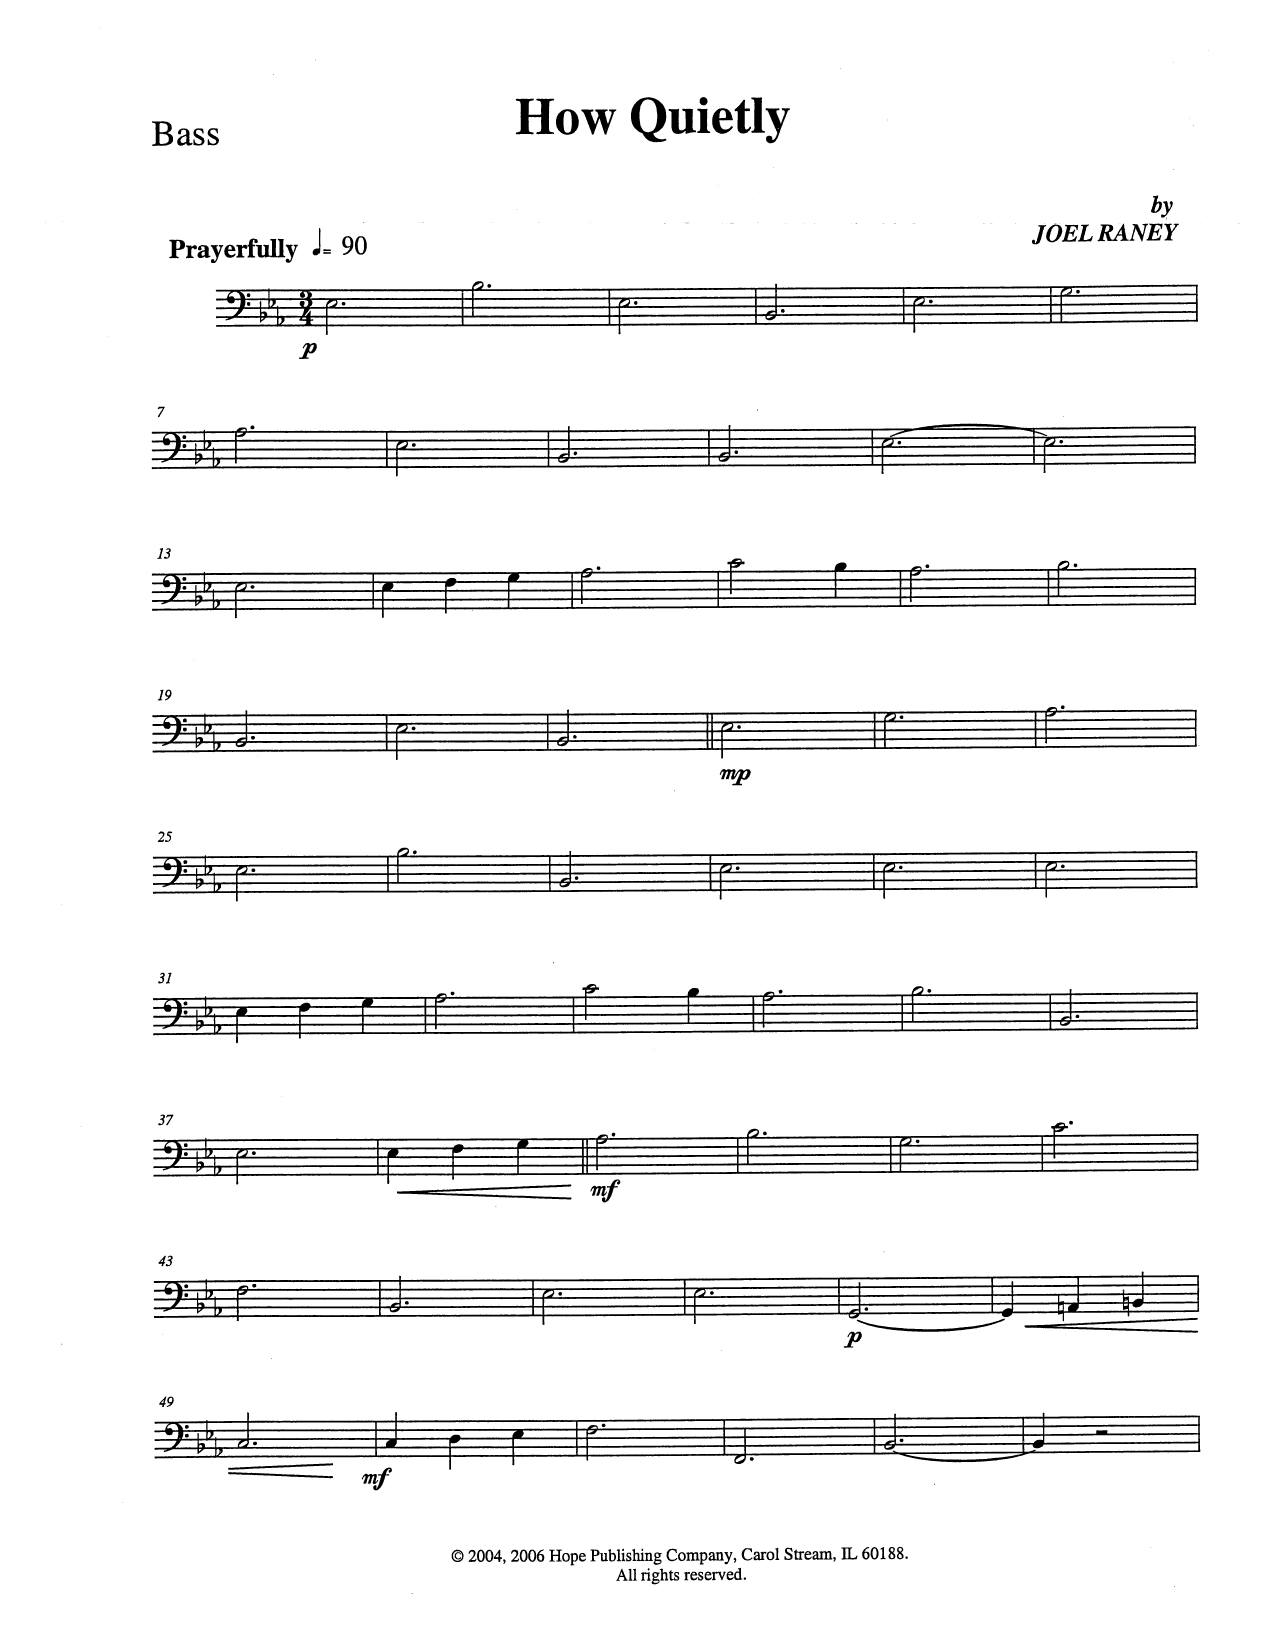 Download Joel Raney How Quietly - Bass Sheet Music